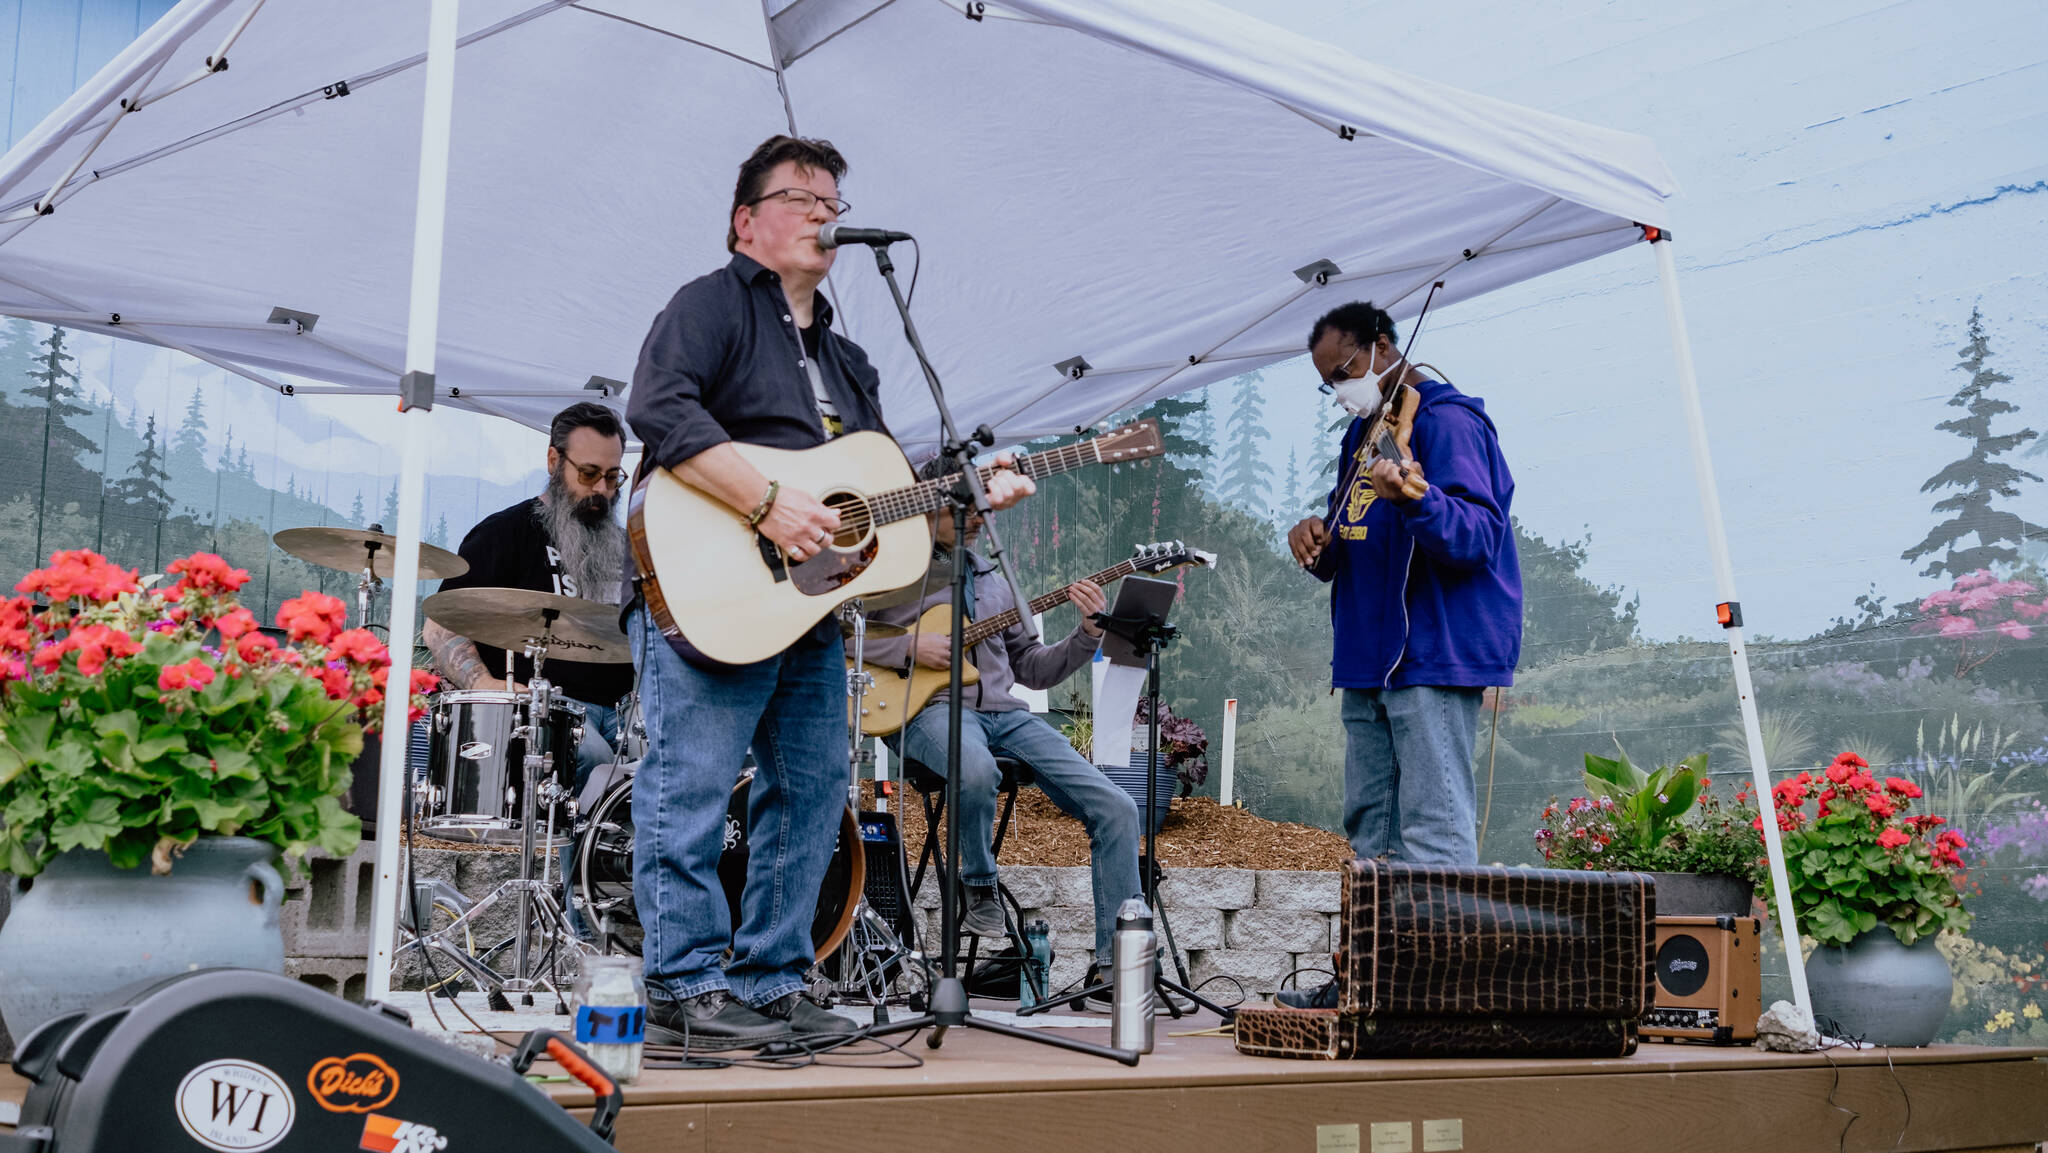 The Erik Christensen Band plays at the pop up plaza. (Photo by Matt Sionson.)